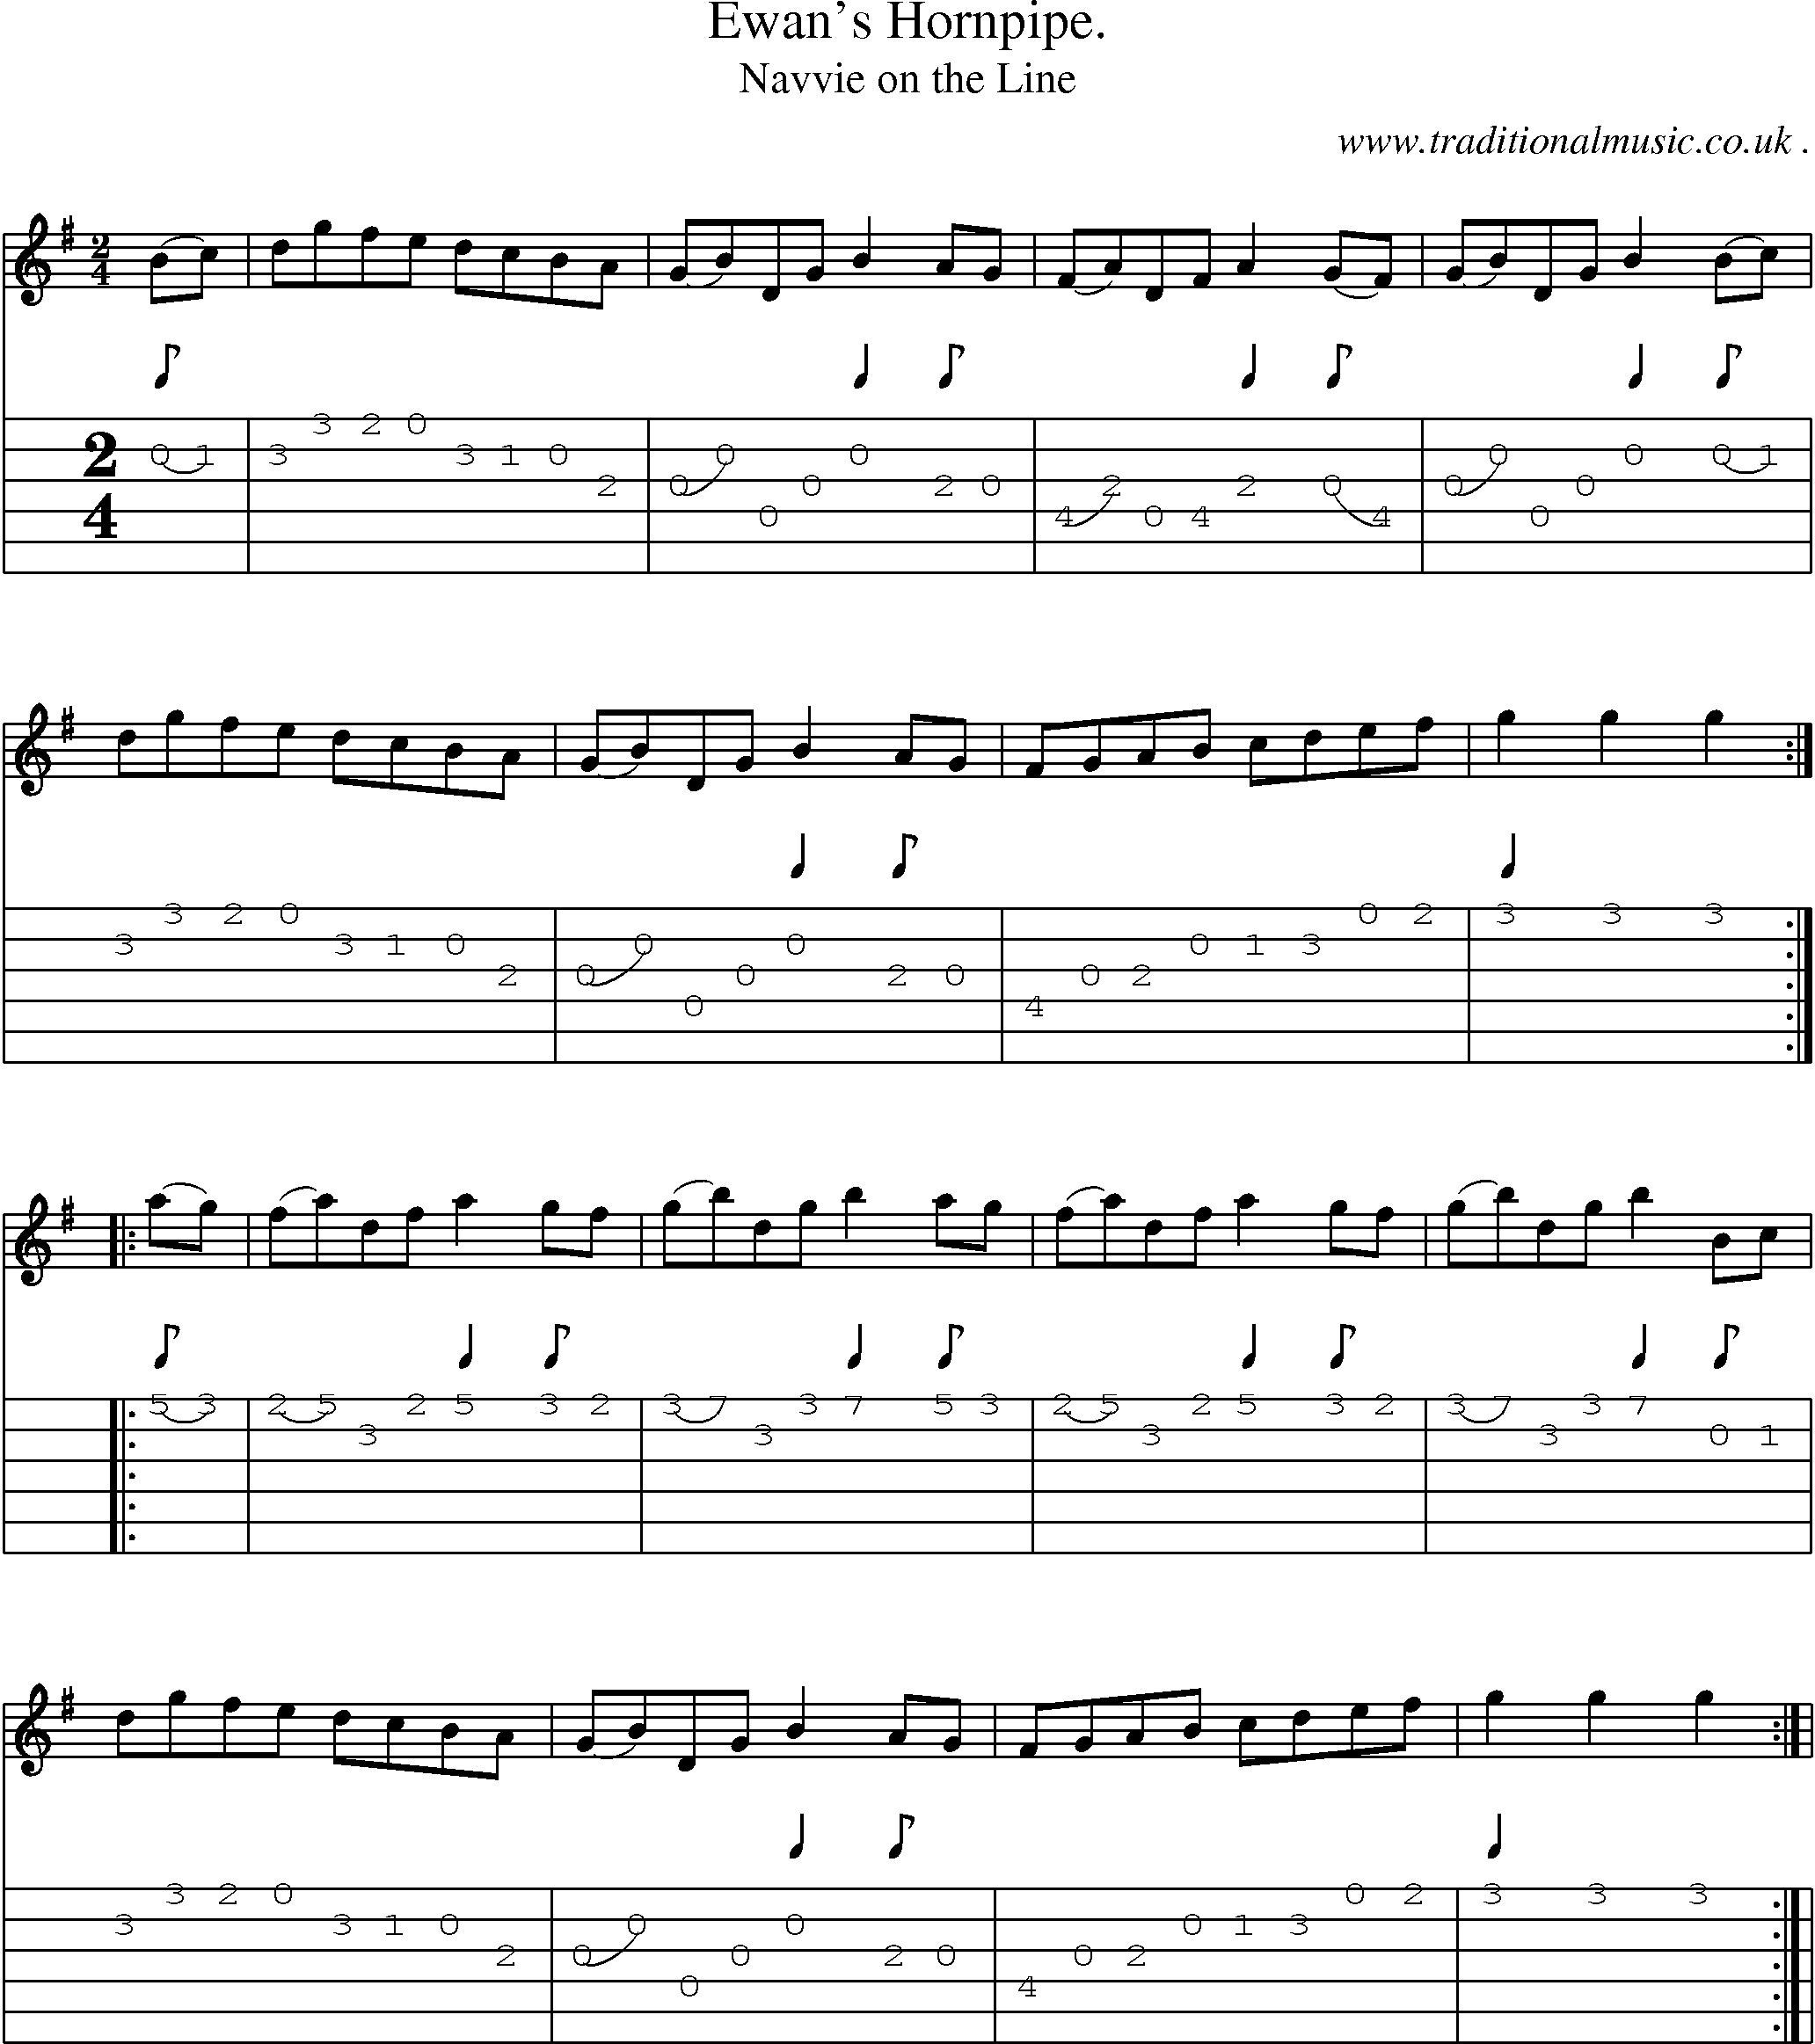 Sheet-Music and Guitar Tabs for Ewans Hornpipe